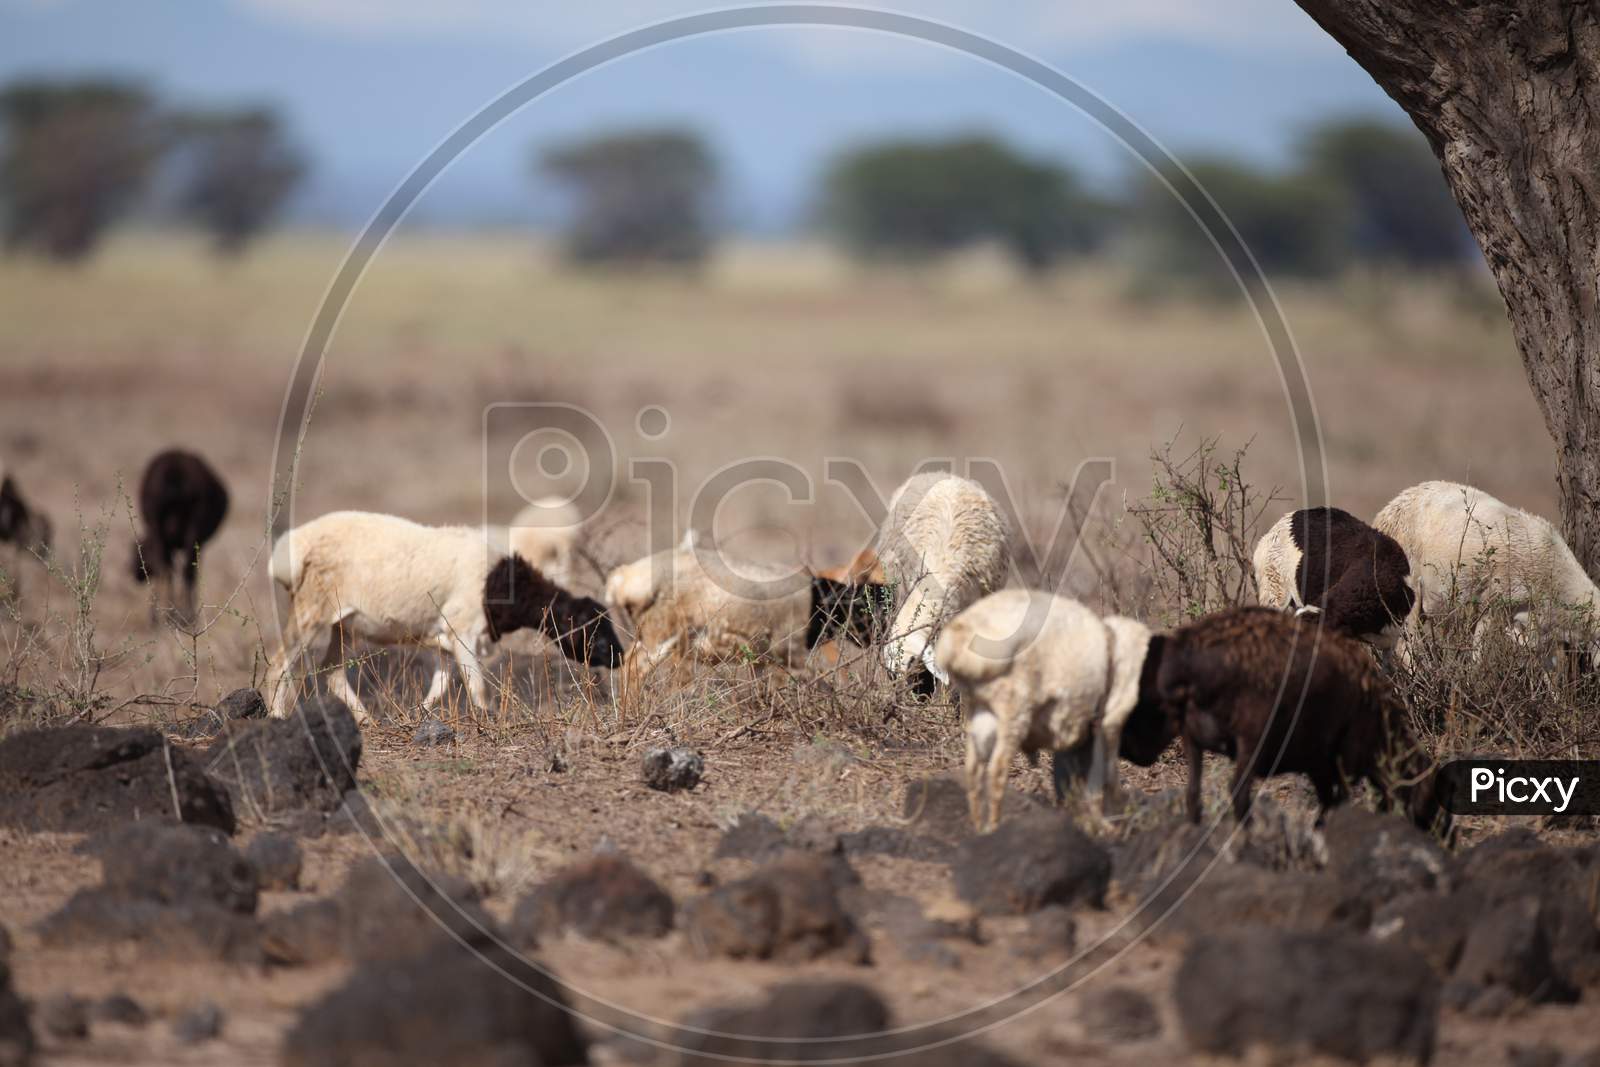 A Group of Sheep grazing